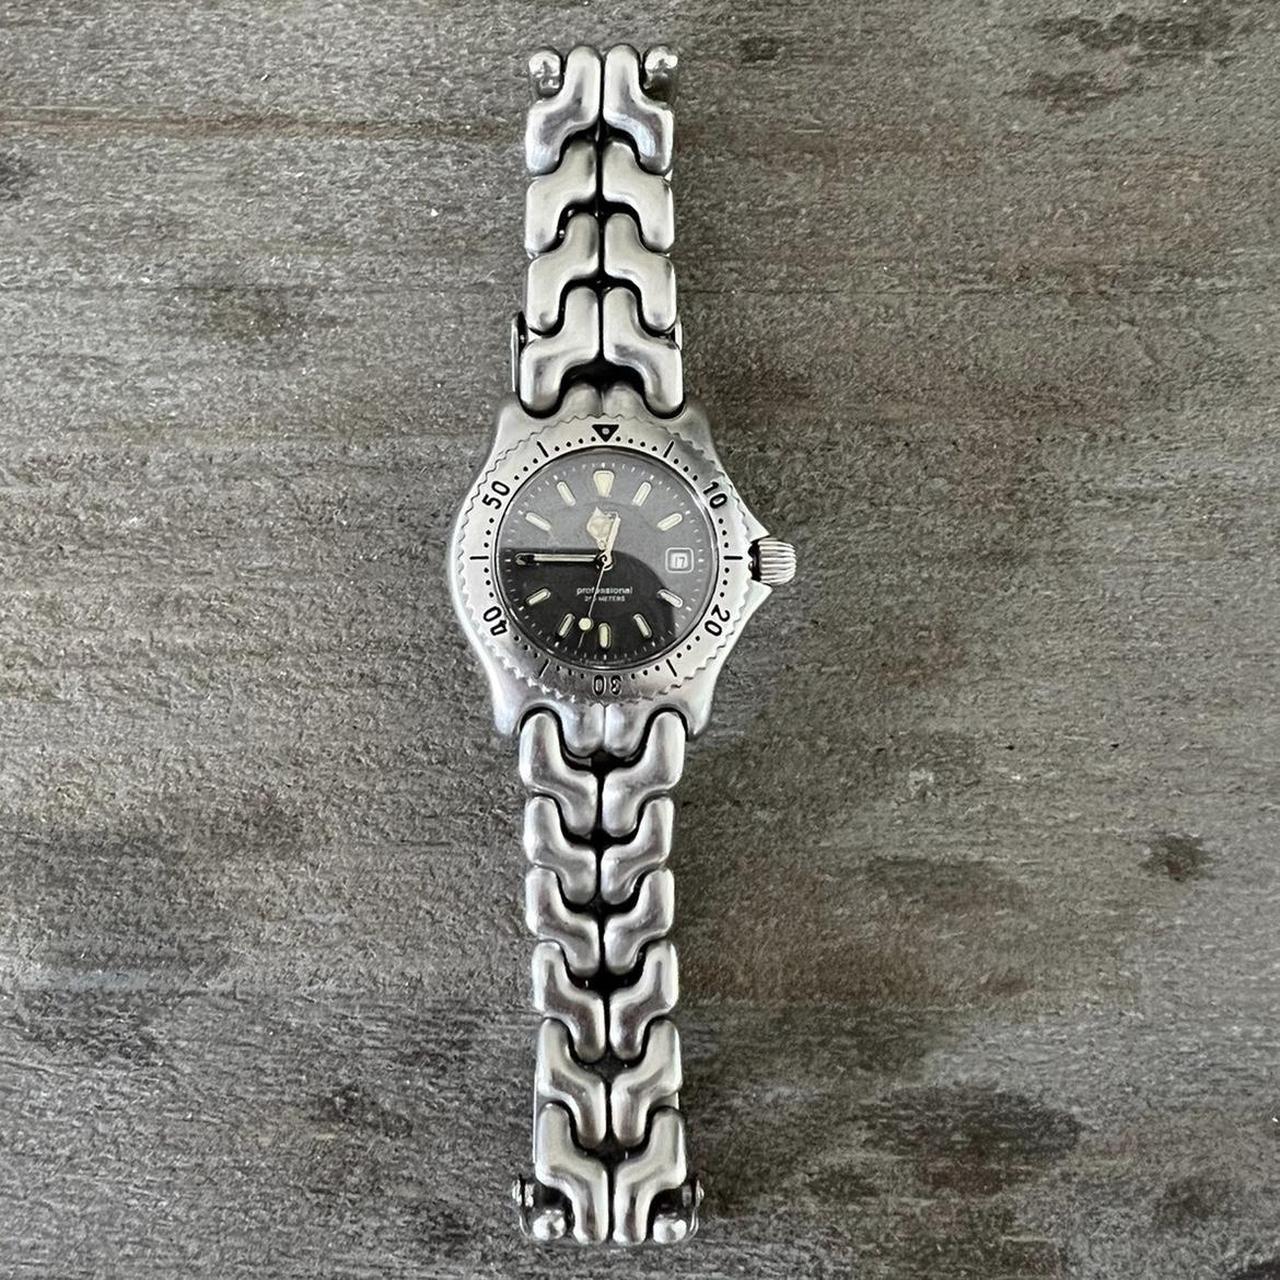 Product Image 2 - Ladies tag heuer watch

Super rare